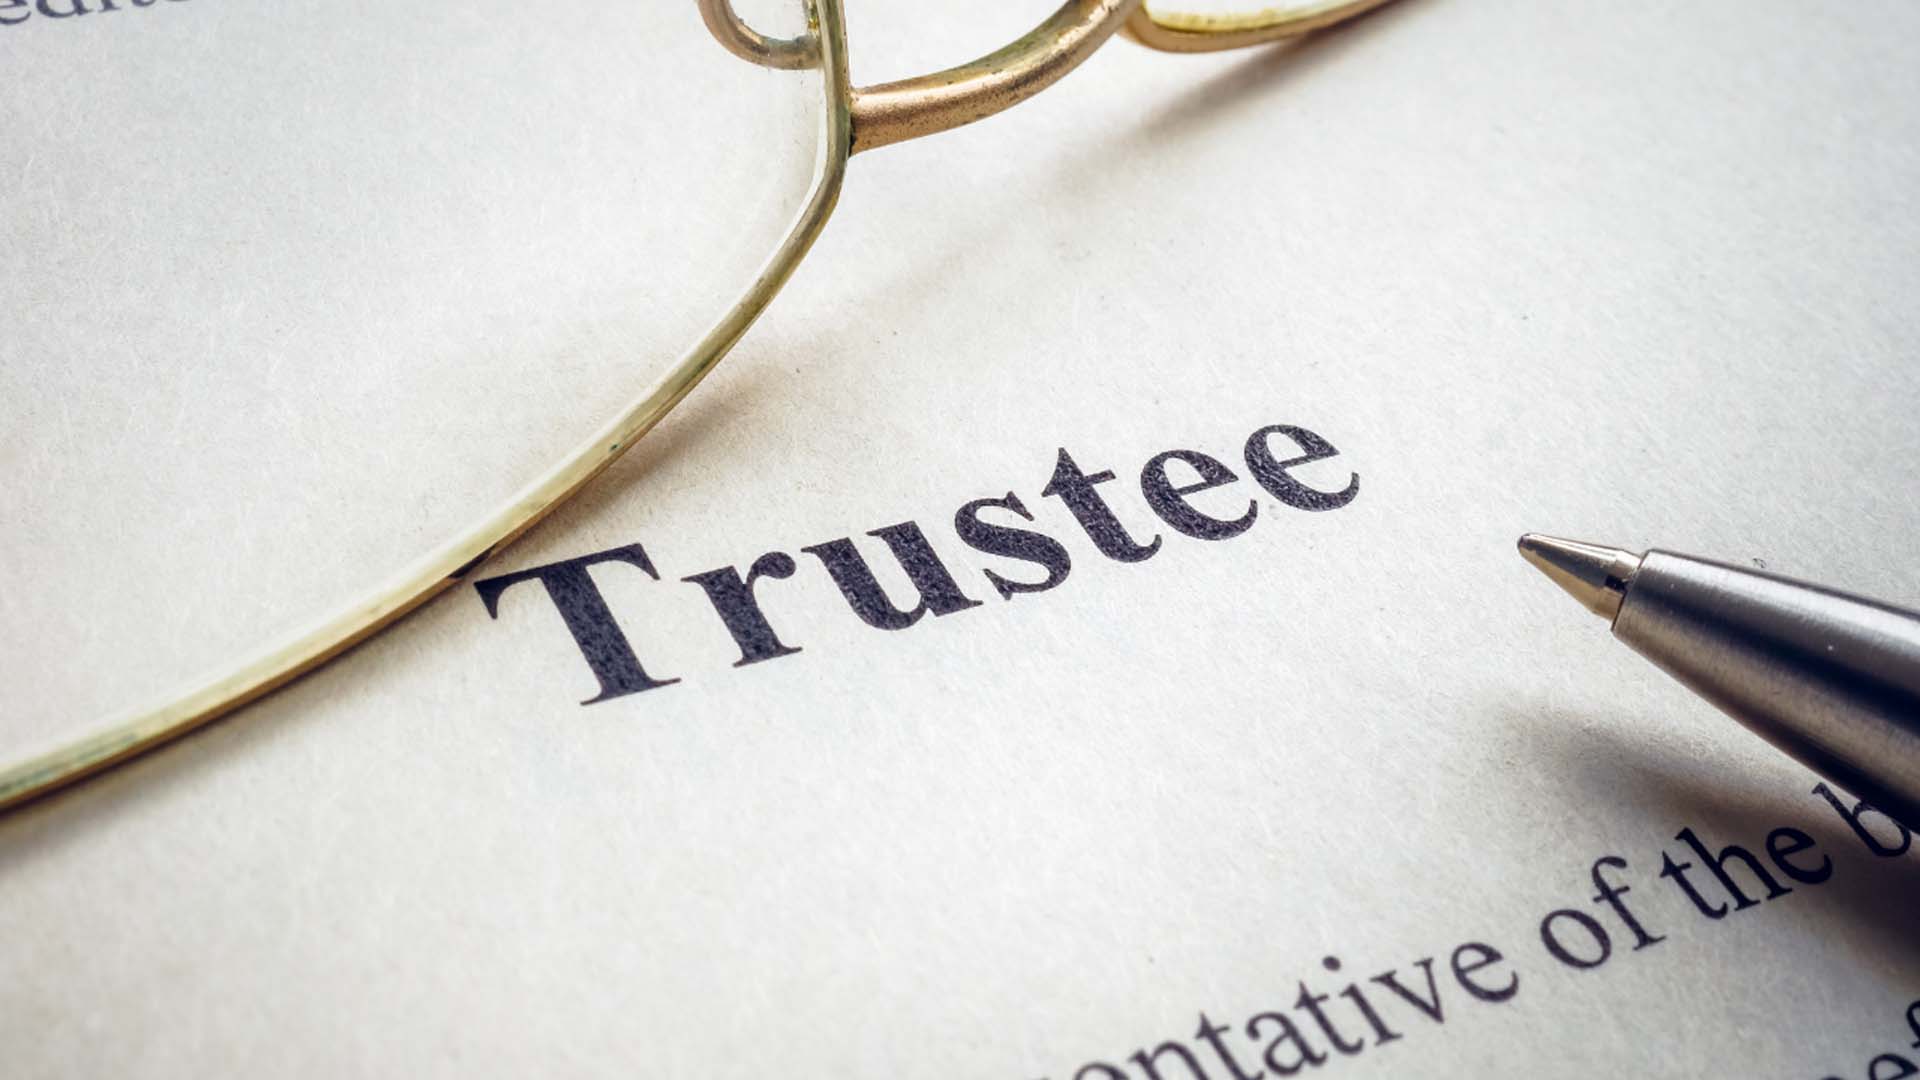 What Is A Special Needs Trust Trustee?